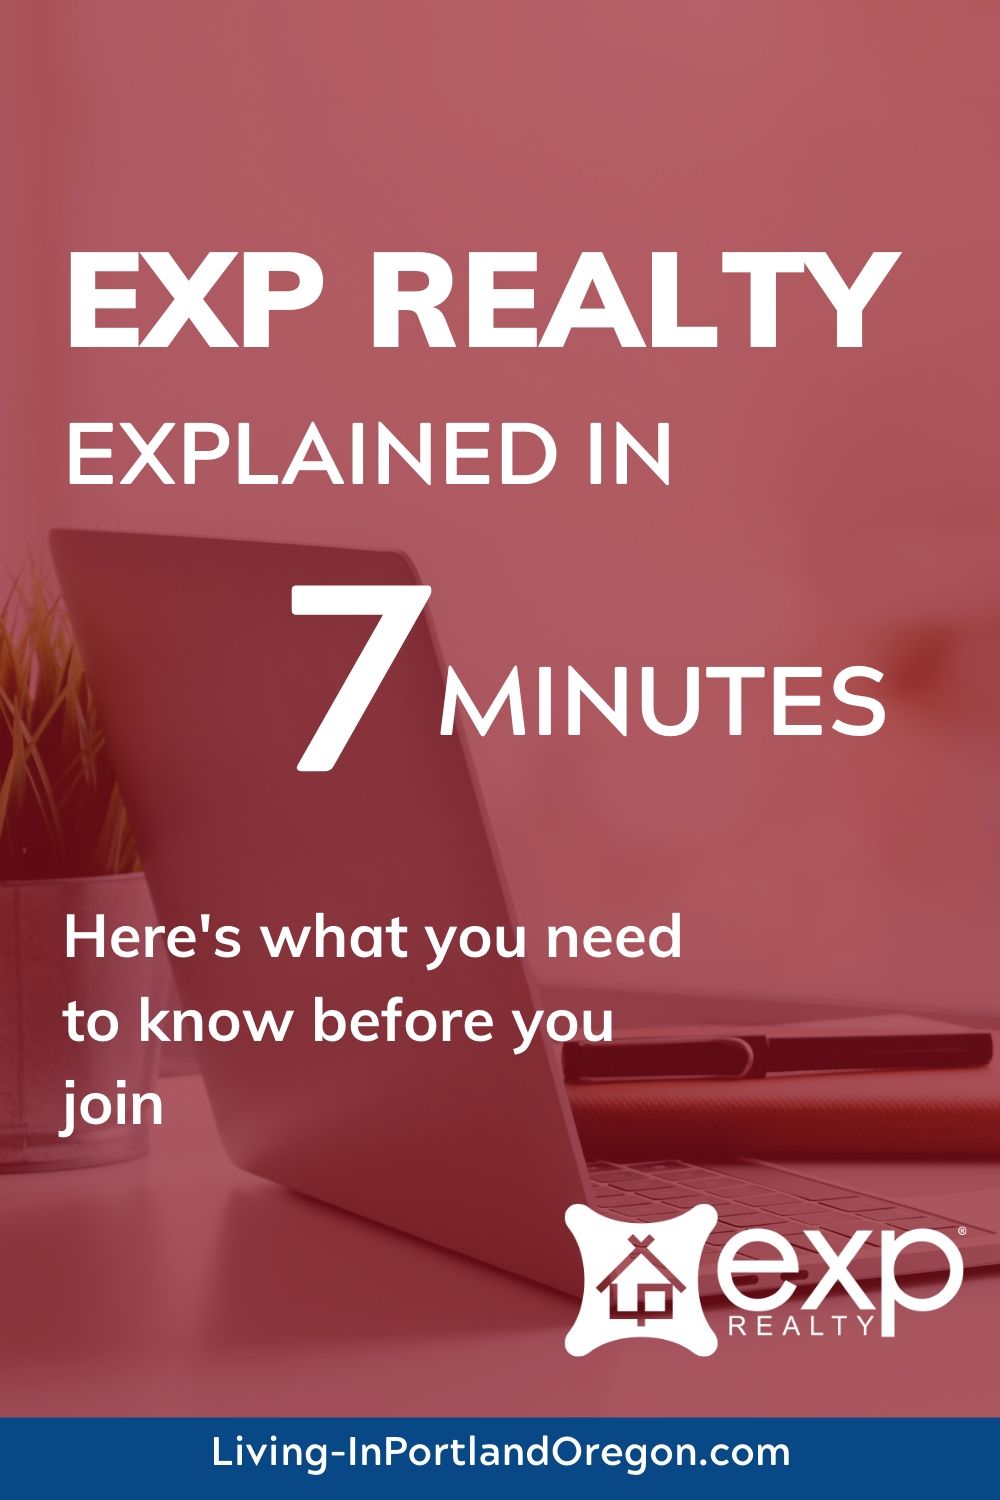 eXp Realty explained in 7 minutes